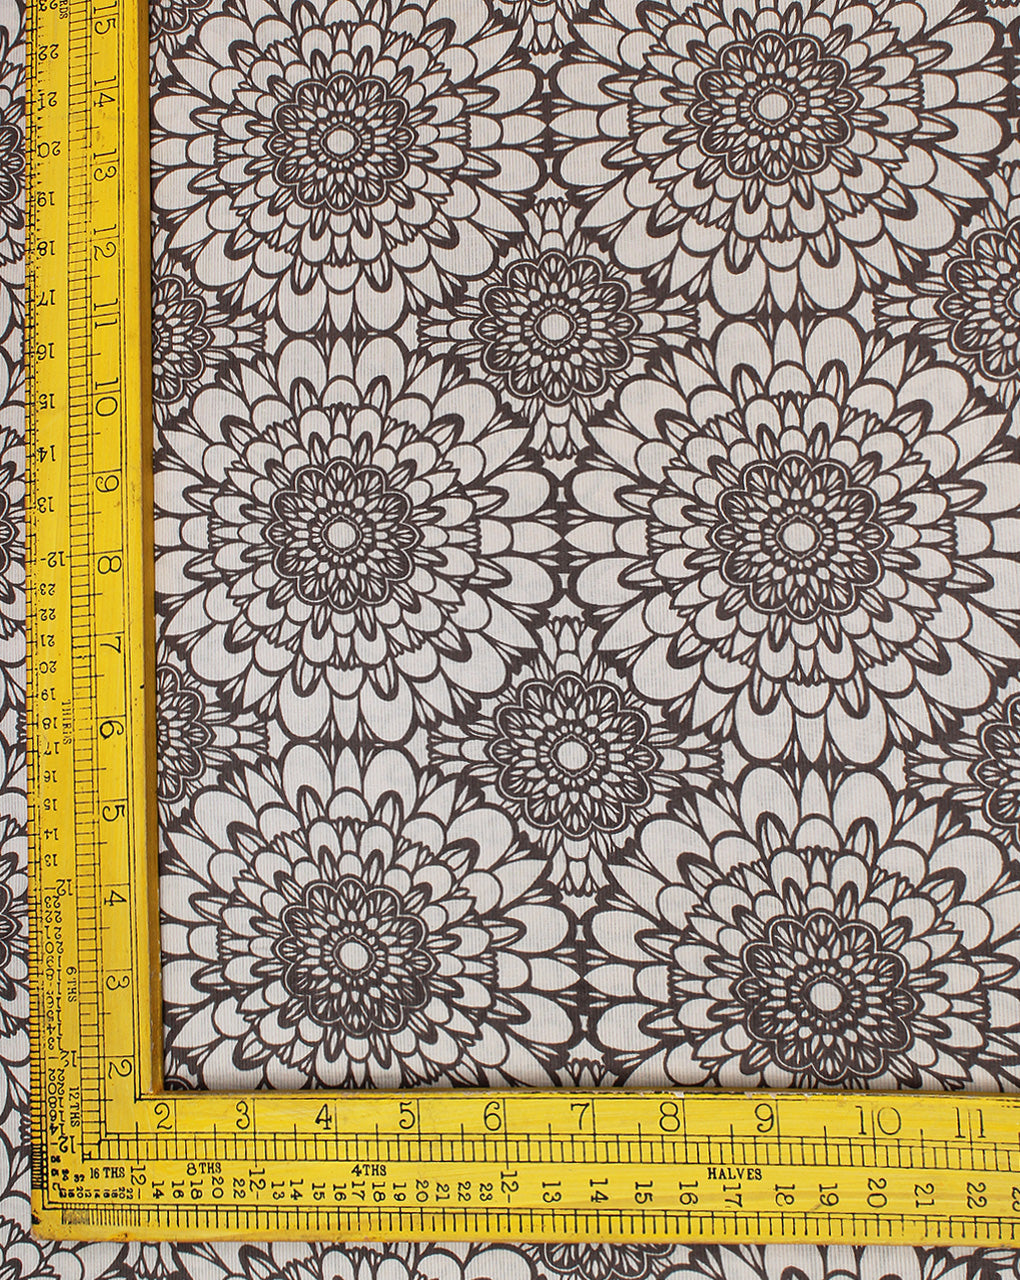 Light Grey And Light Brown Floral Printed Cotton Cambric Fabric